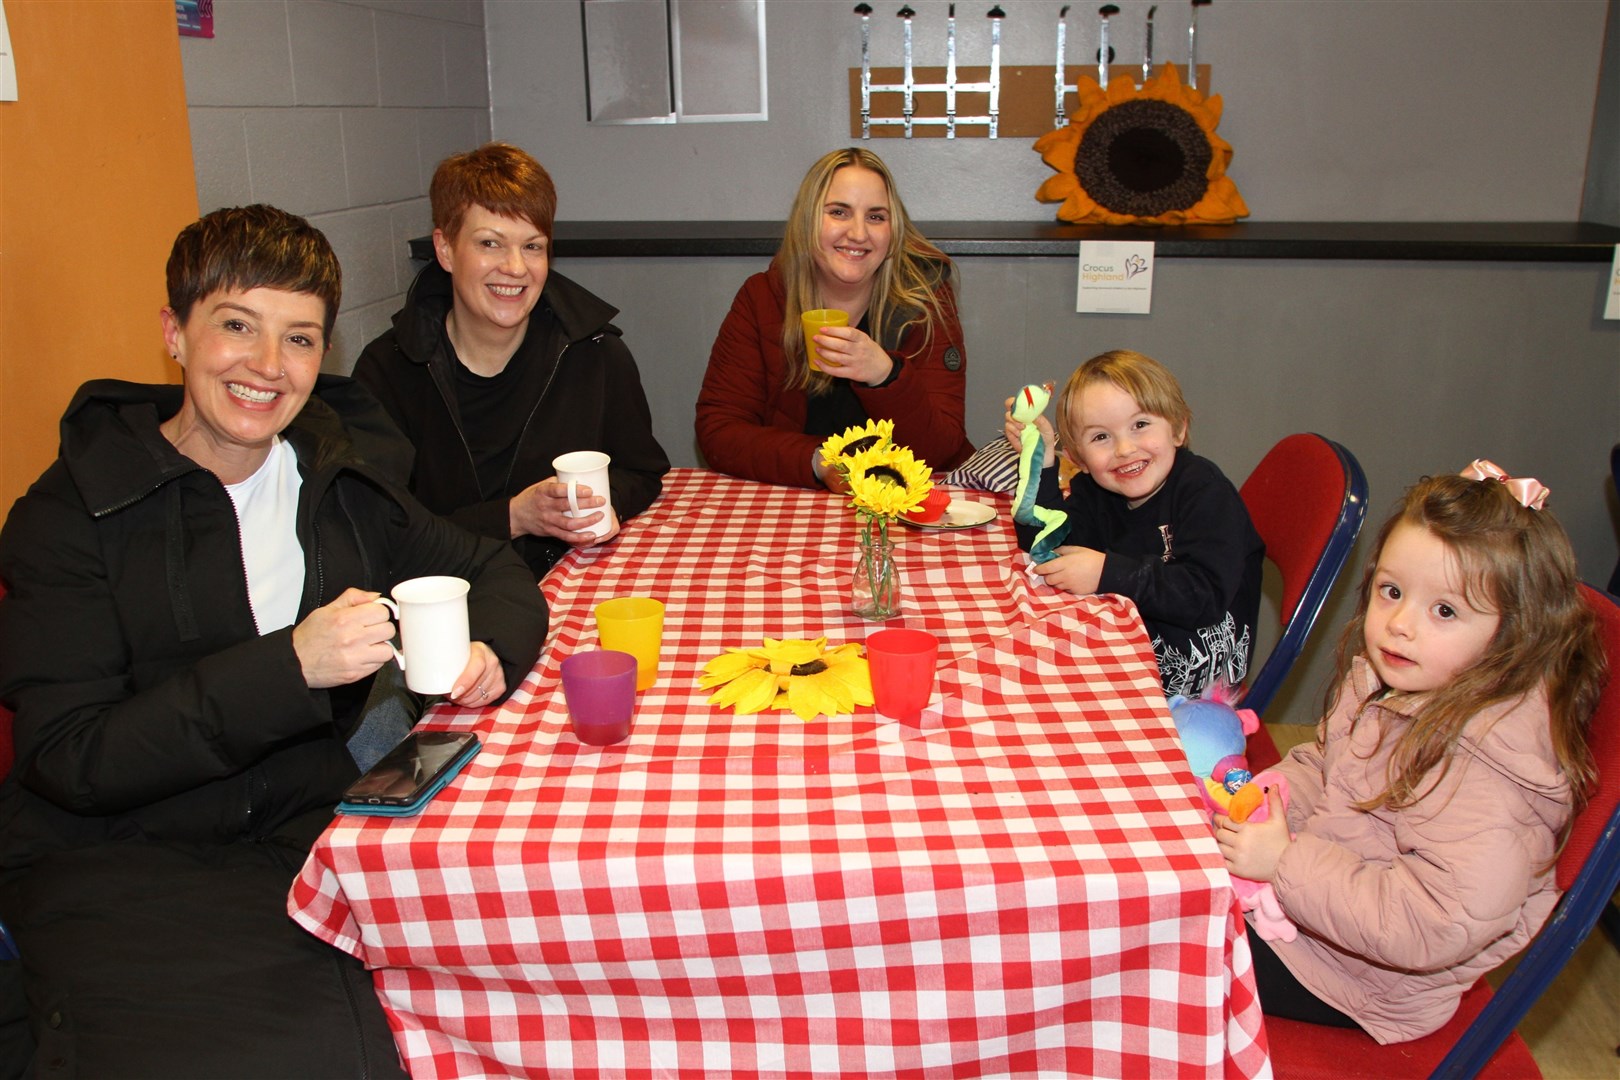 Kerry Alexander with friends and family enjoying a cuppa.